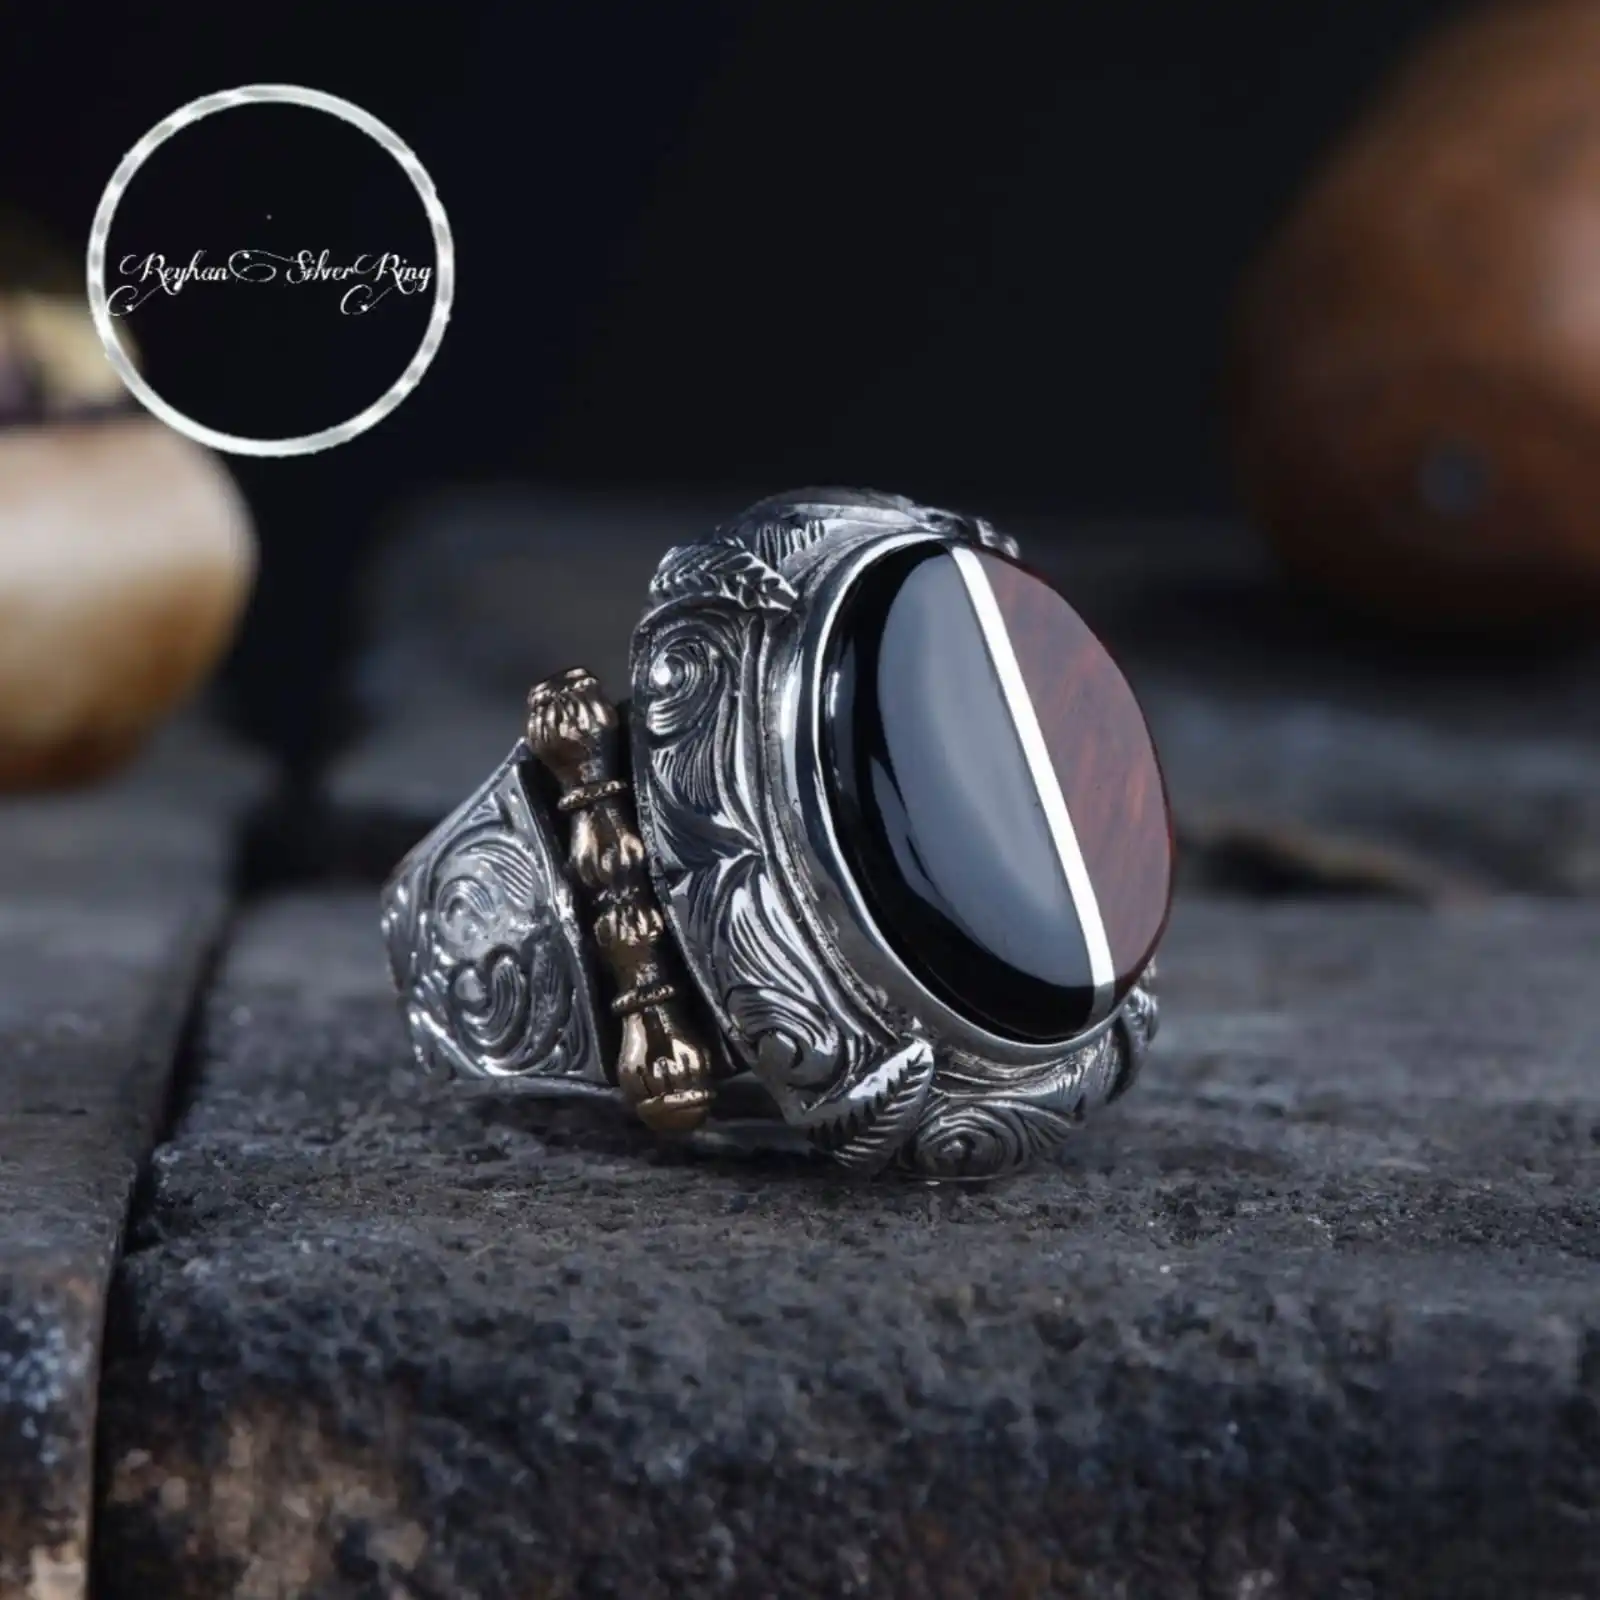 Handcrafted Silver Inlaid Men's Ring with Coca and Oltu Stone - Unique Splitting and Pencil Engraved Design big engraving ball vise tool block ring setting tools diamond stone setting with full attachment